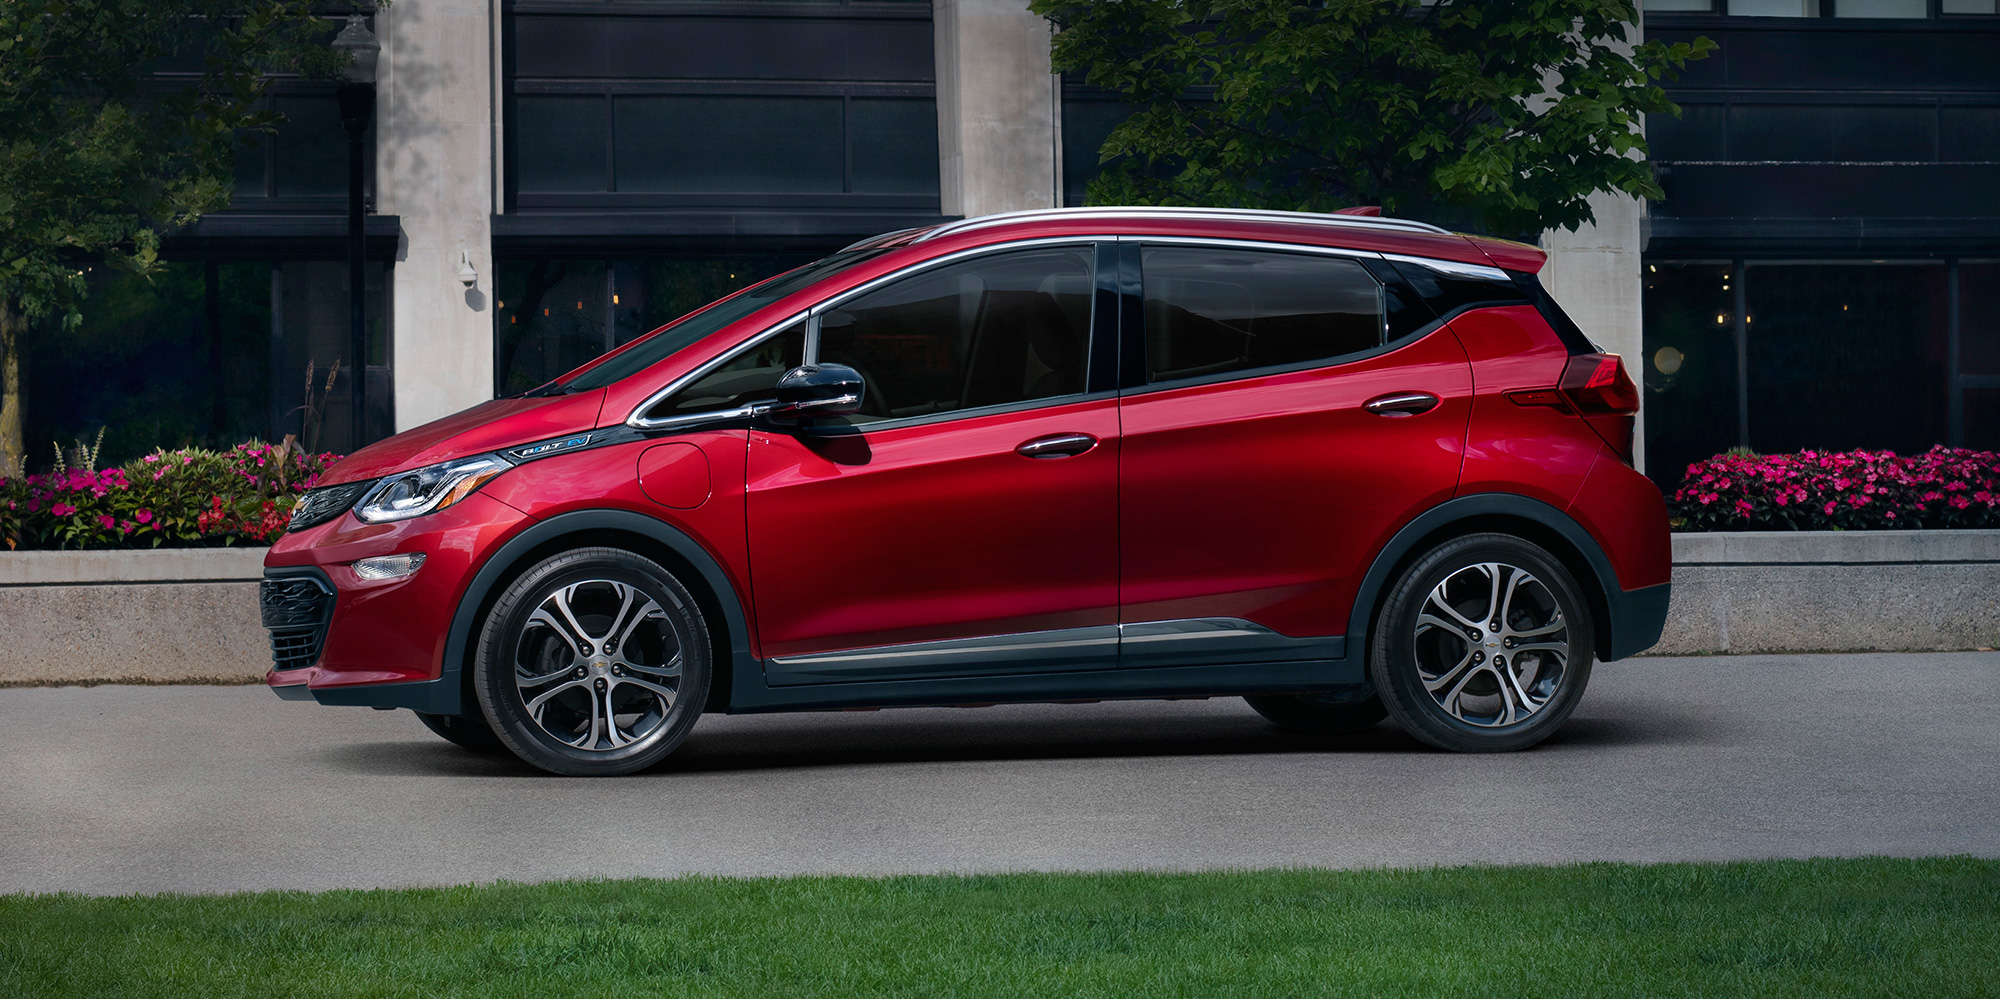 Gm Discounts Chevy Bolt Ev Electric Car Up To 10 000 For Limited Time Electrek